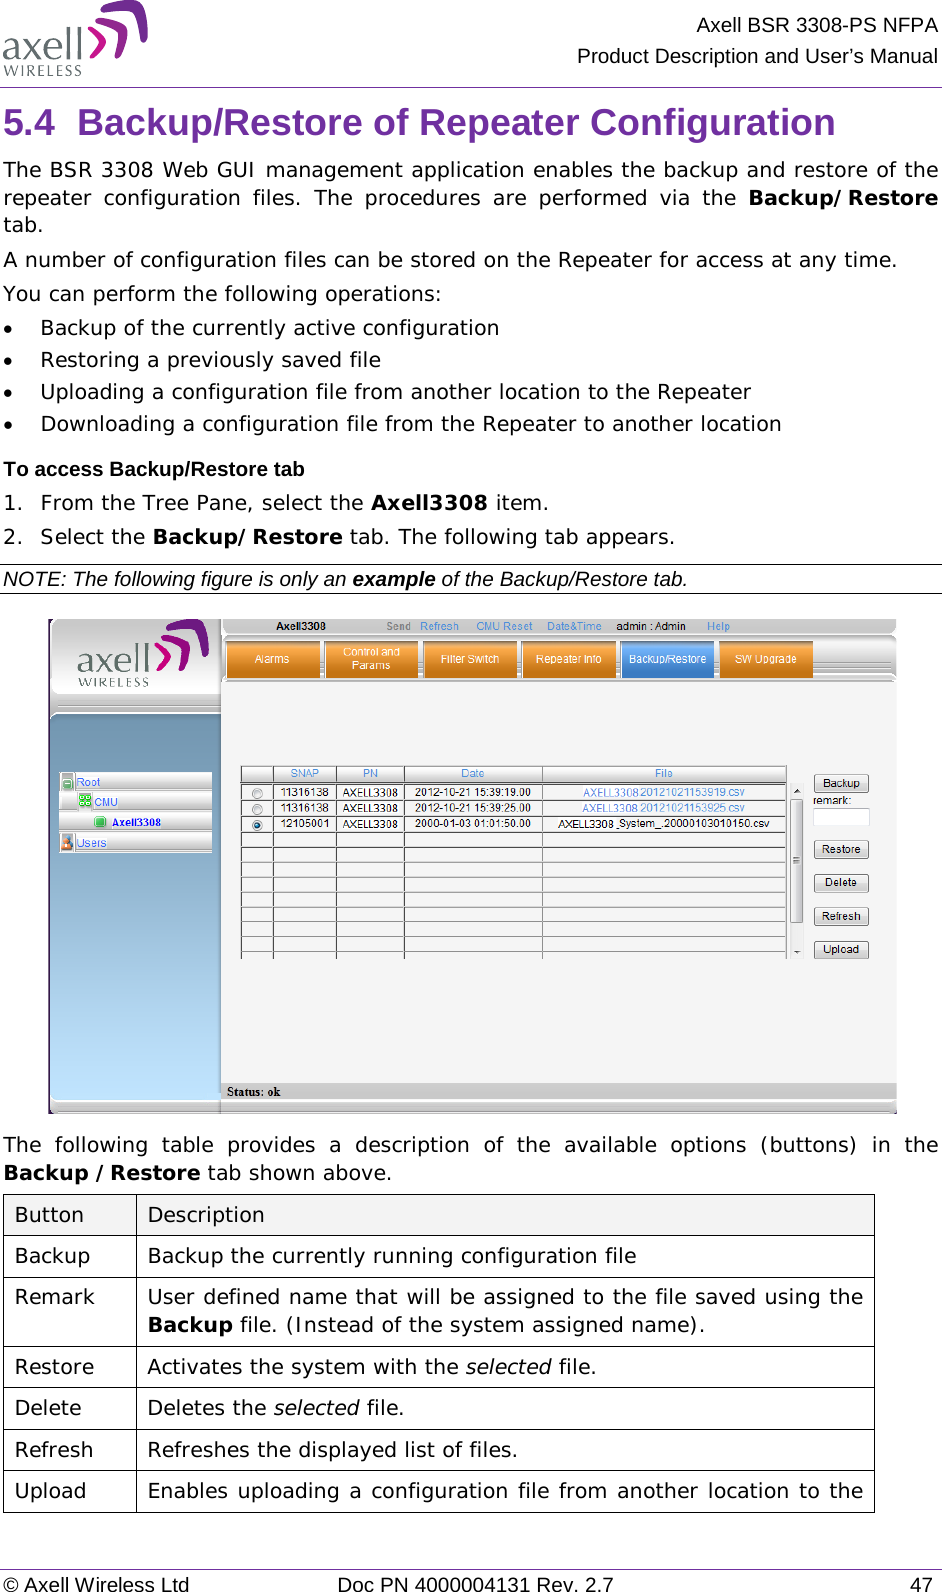 Axell BSR 3308-PS NFPA Product Description and User’s Manual © Axell Wireless Ltd Doc PN 4000004131 Rev. 2.7 47 5.4  Backup/Restore of Repeater Configuration  The BSR 3308 Web GUI management application enables the backup and restore of the repeater configuration files. The procedures are performed via the Backup/Restore tab. A number of configuration files can be stored on the Repeater for access at any time. You can perform the following operations: • Backup of the currently active configuration • Restoring a previously saved file  • Uploading a configuration file from another location to the Repeater • Downloading a configuration file from the Repeater to another location To access Backup/Restore tab 1.  From the Tree Pane, select the Axell3308 item. 2.  Select the Backup/Restore tab. The following tab appears. NOTE: The following figure is only an example of the Backup/Restore tab.  The following table provides a description of the available options (buttons) in the Backup /Restore tab shown above.  Button Description Backup Backup the currently running configuration file Remark User defined name that will be assigned to the file saved using the Backup file. (Instead of the system assigned name). Restore Activates the system with the selected file. Delete  Deletes the selected file. Refresh Refreshes the displayed list of files. Upload Enables uploading a configuration file from another location to the 